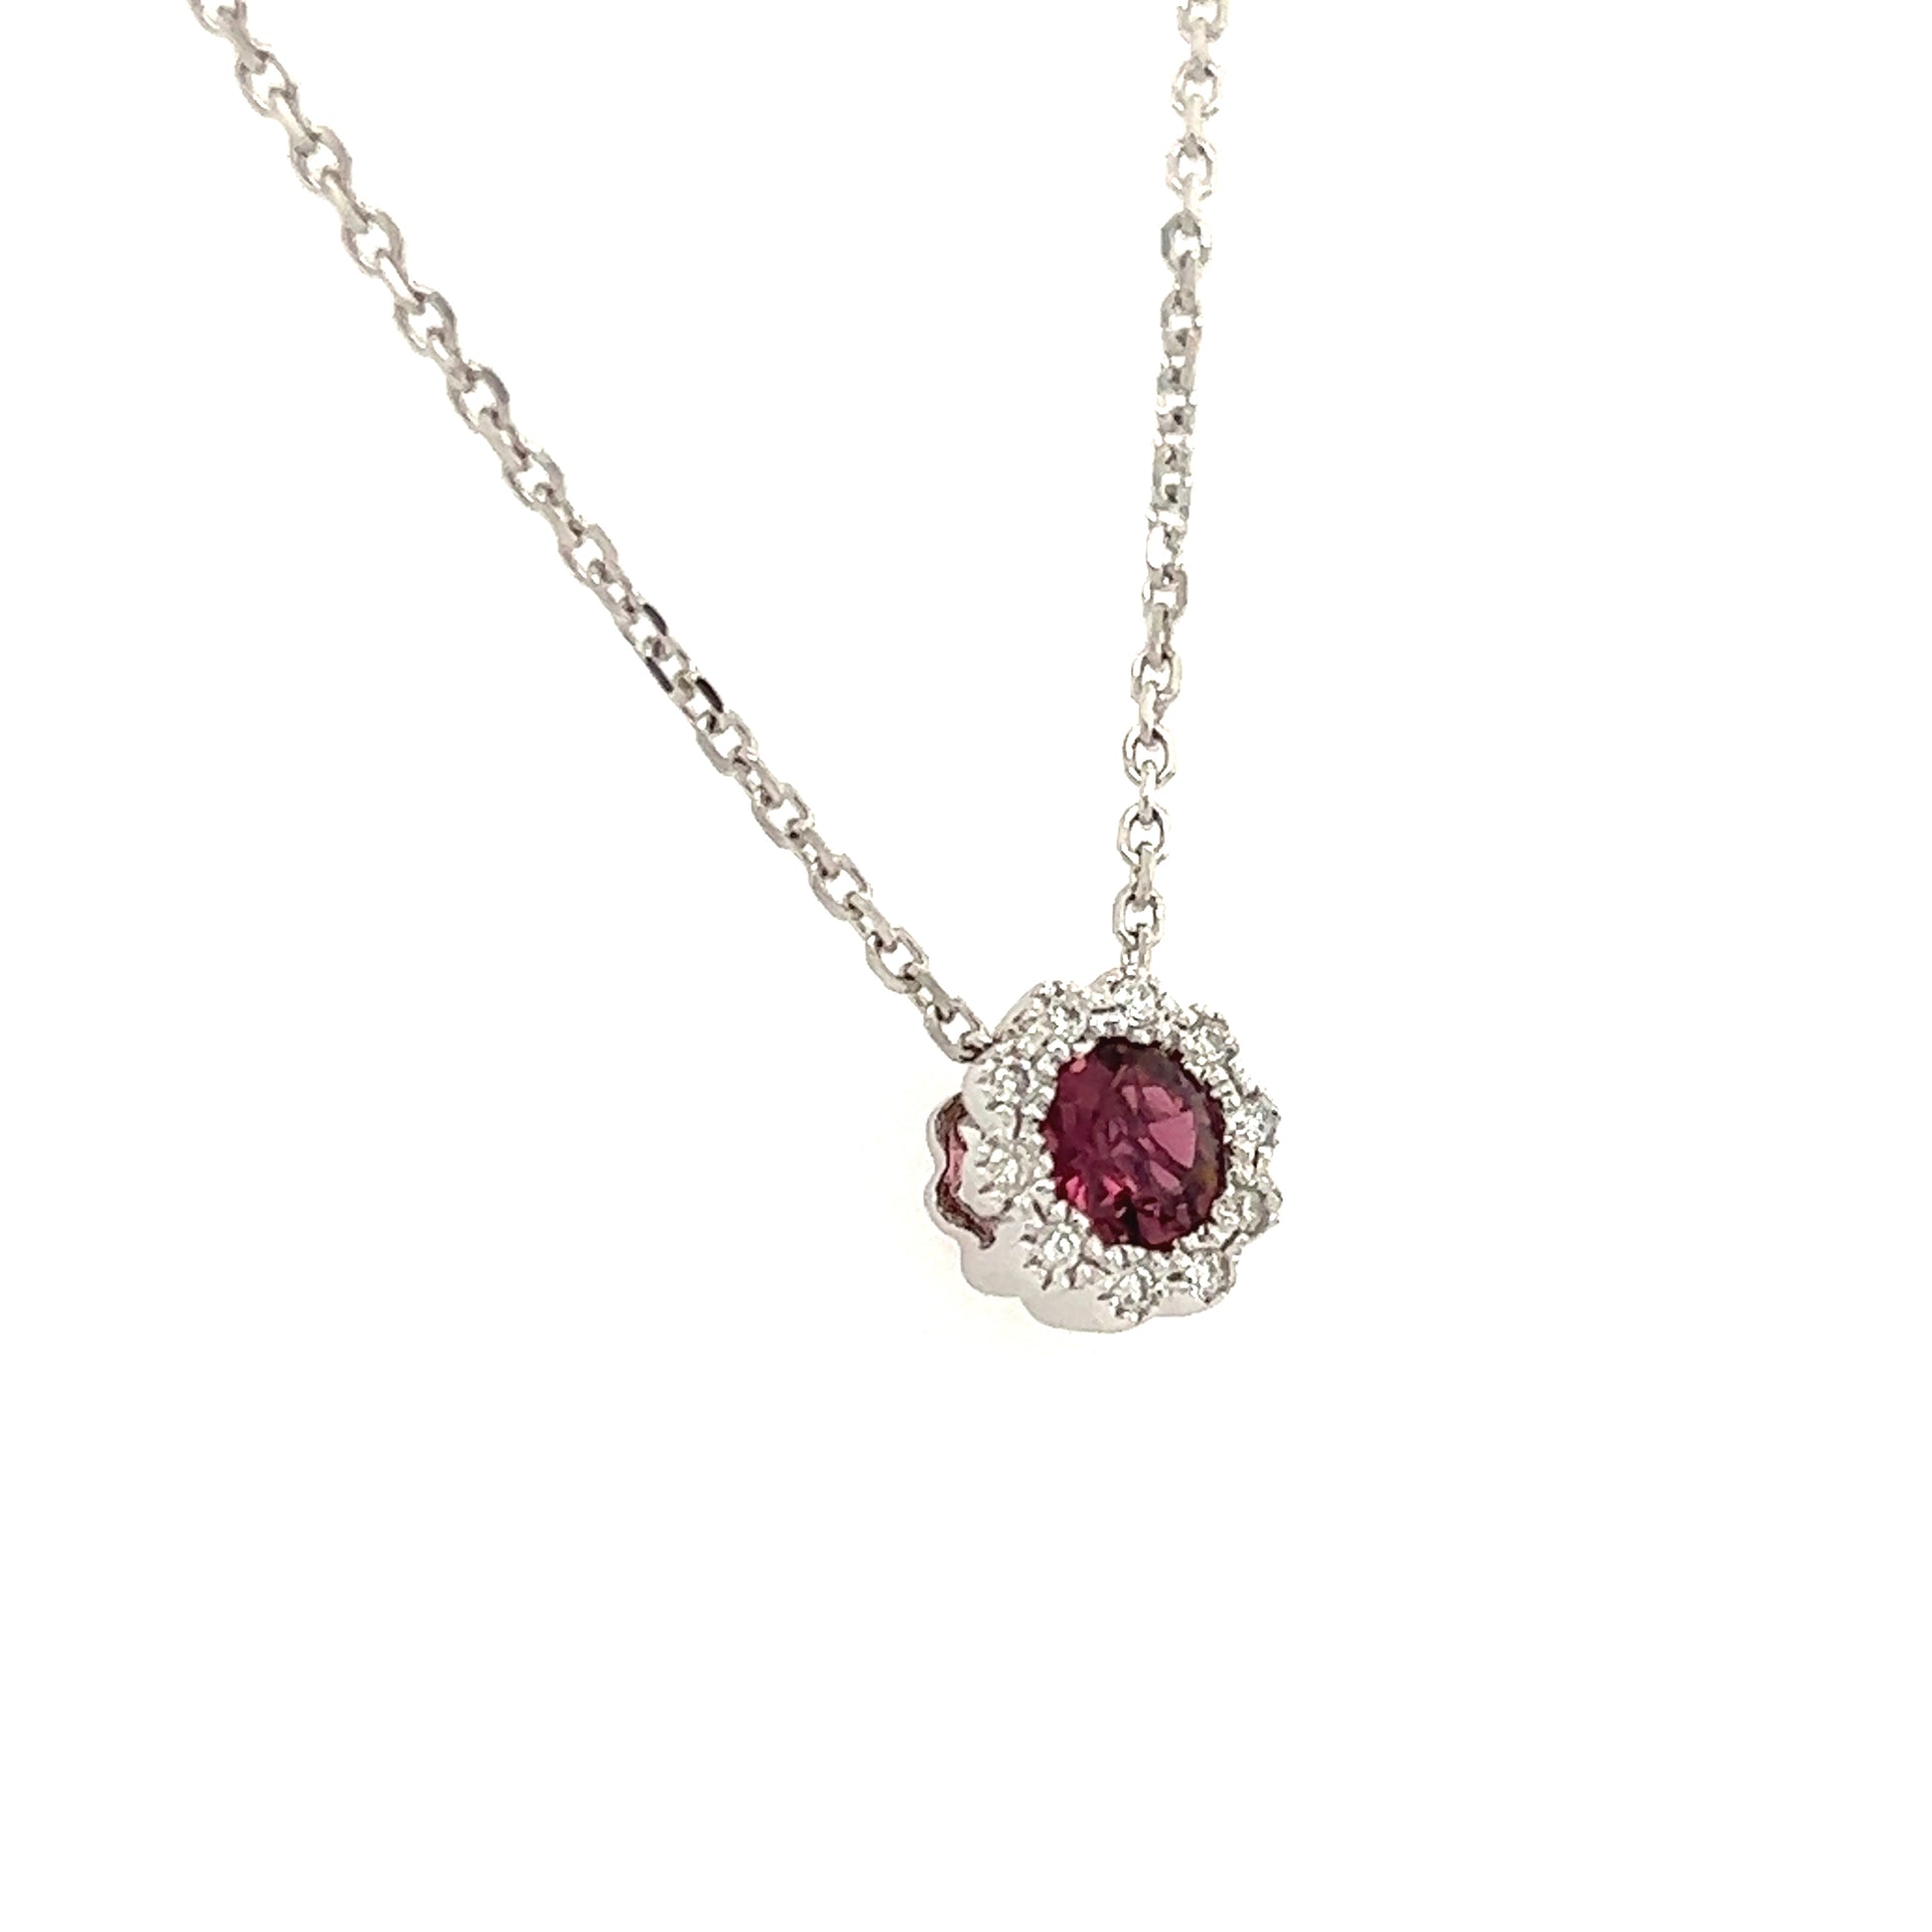 Floral Tourmaline Pendant with Diamond Halo in 14K White Gold Right Side View Pendant and Chain